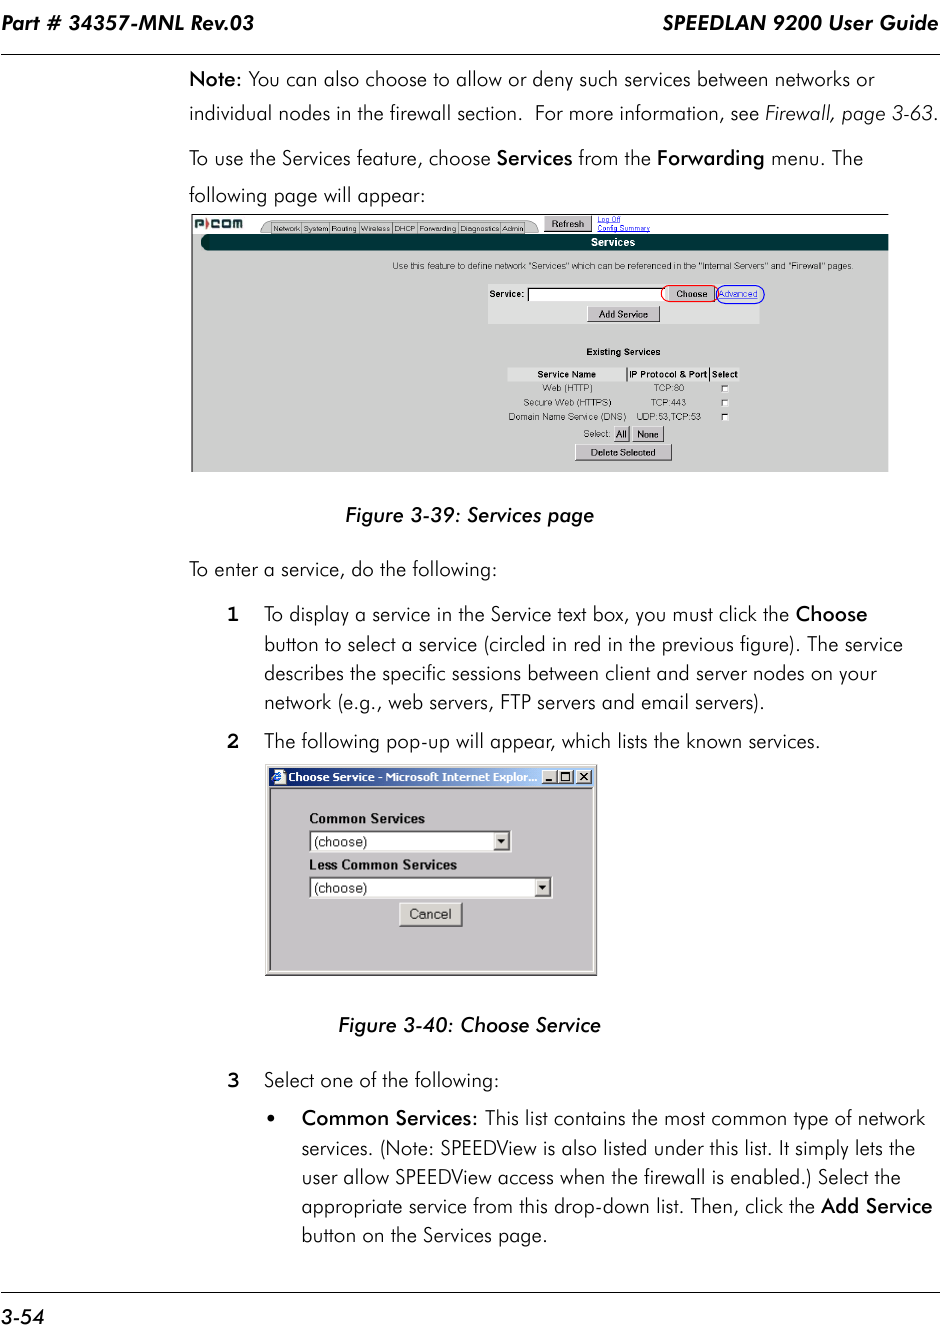 Part # 34357-MNL Rev.03                                                                   SPEEDLAN 9200 User Guide 3-54Note: You can also choose to allow or deny such services between networks or individual nodes in the firewall section.  For more information, see Firewall, page 3-63.To use the Services feature, choose Services from the Forwarding menu. The following page will appear:Figure 3-39: Services pageTo enter a service, do the following:1To display a service in the Service text box, you must click the Choose button to select a service (circled in red in the previous figure). The service describes the specific sessions between client and server nodes on yournetwork (e.g., web servers, FTP servers and email servers).2The following pop-up will appear, which lists the known services. Figure 3-40: Choose Service3Select one of the following:•Common Services: This list contains the most common type of network services. (Note: SPEEDView is also listed under this list. It simply lets the user allow SPEEDView access when the firewall is enabled.) Select the appropriate service from this drop-down list. Then, click the Add Service button on the Services page.  